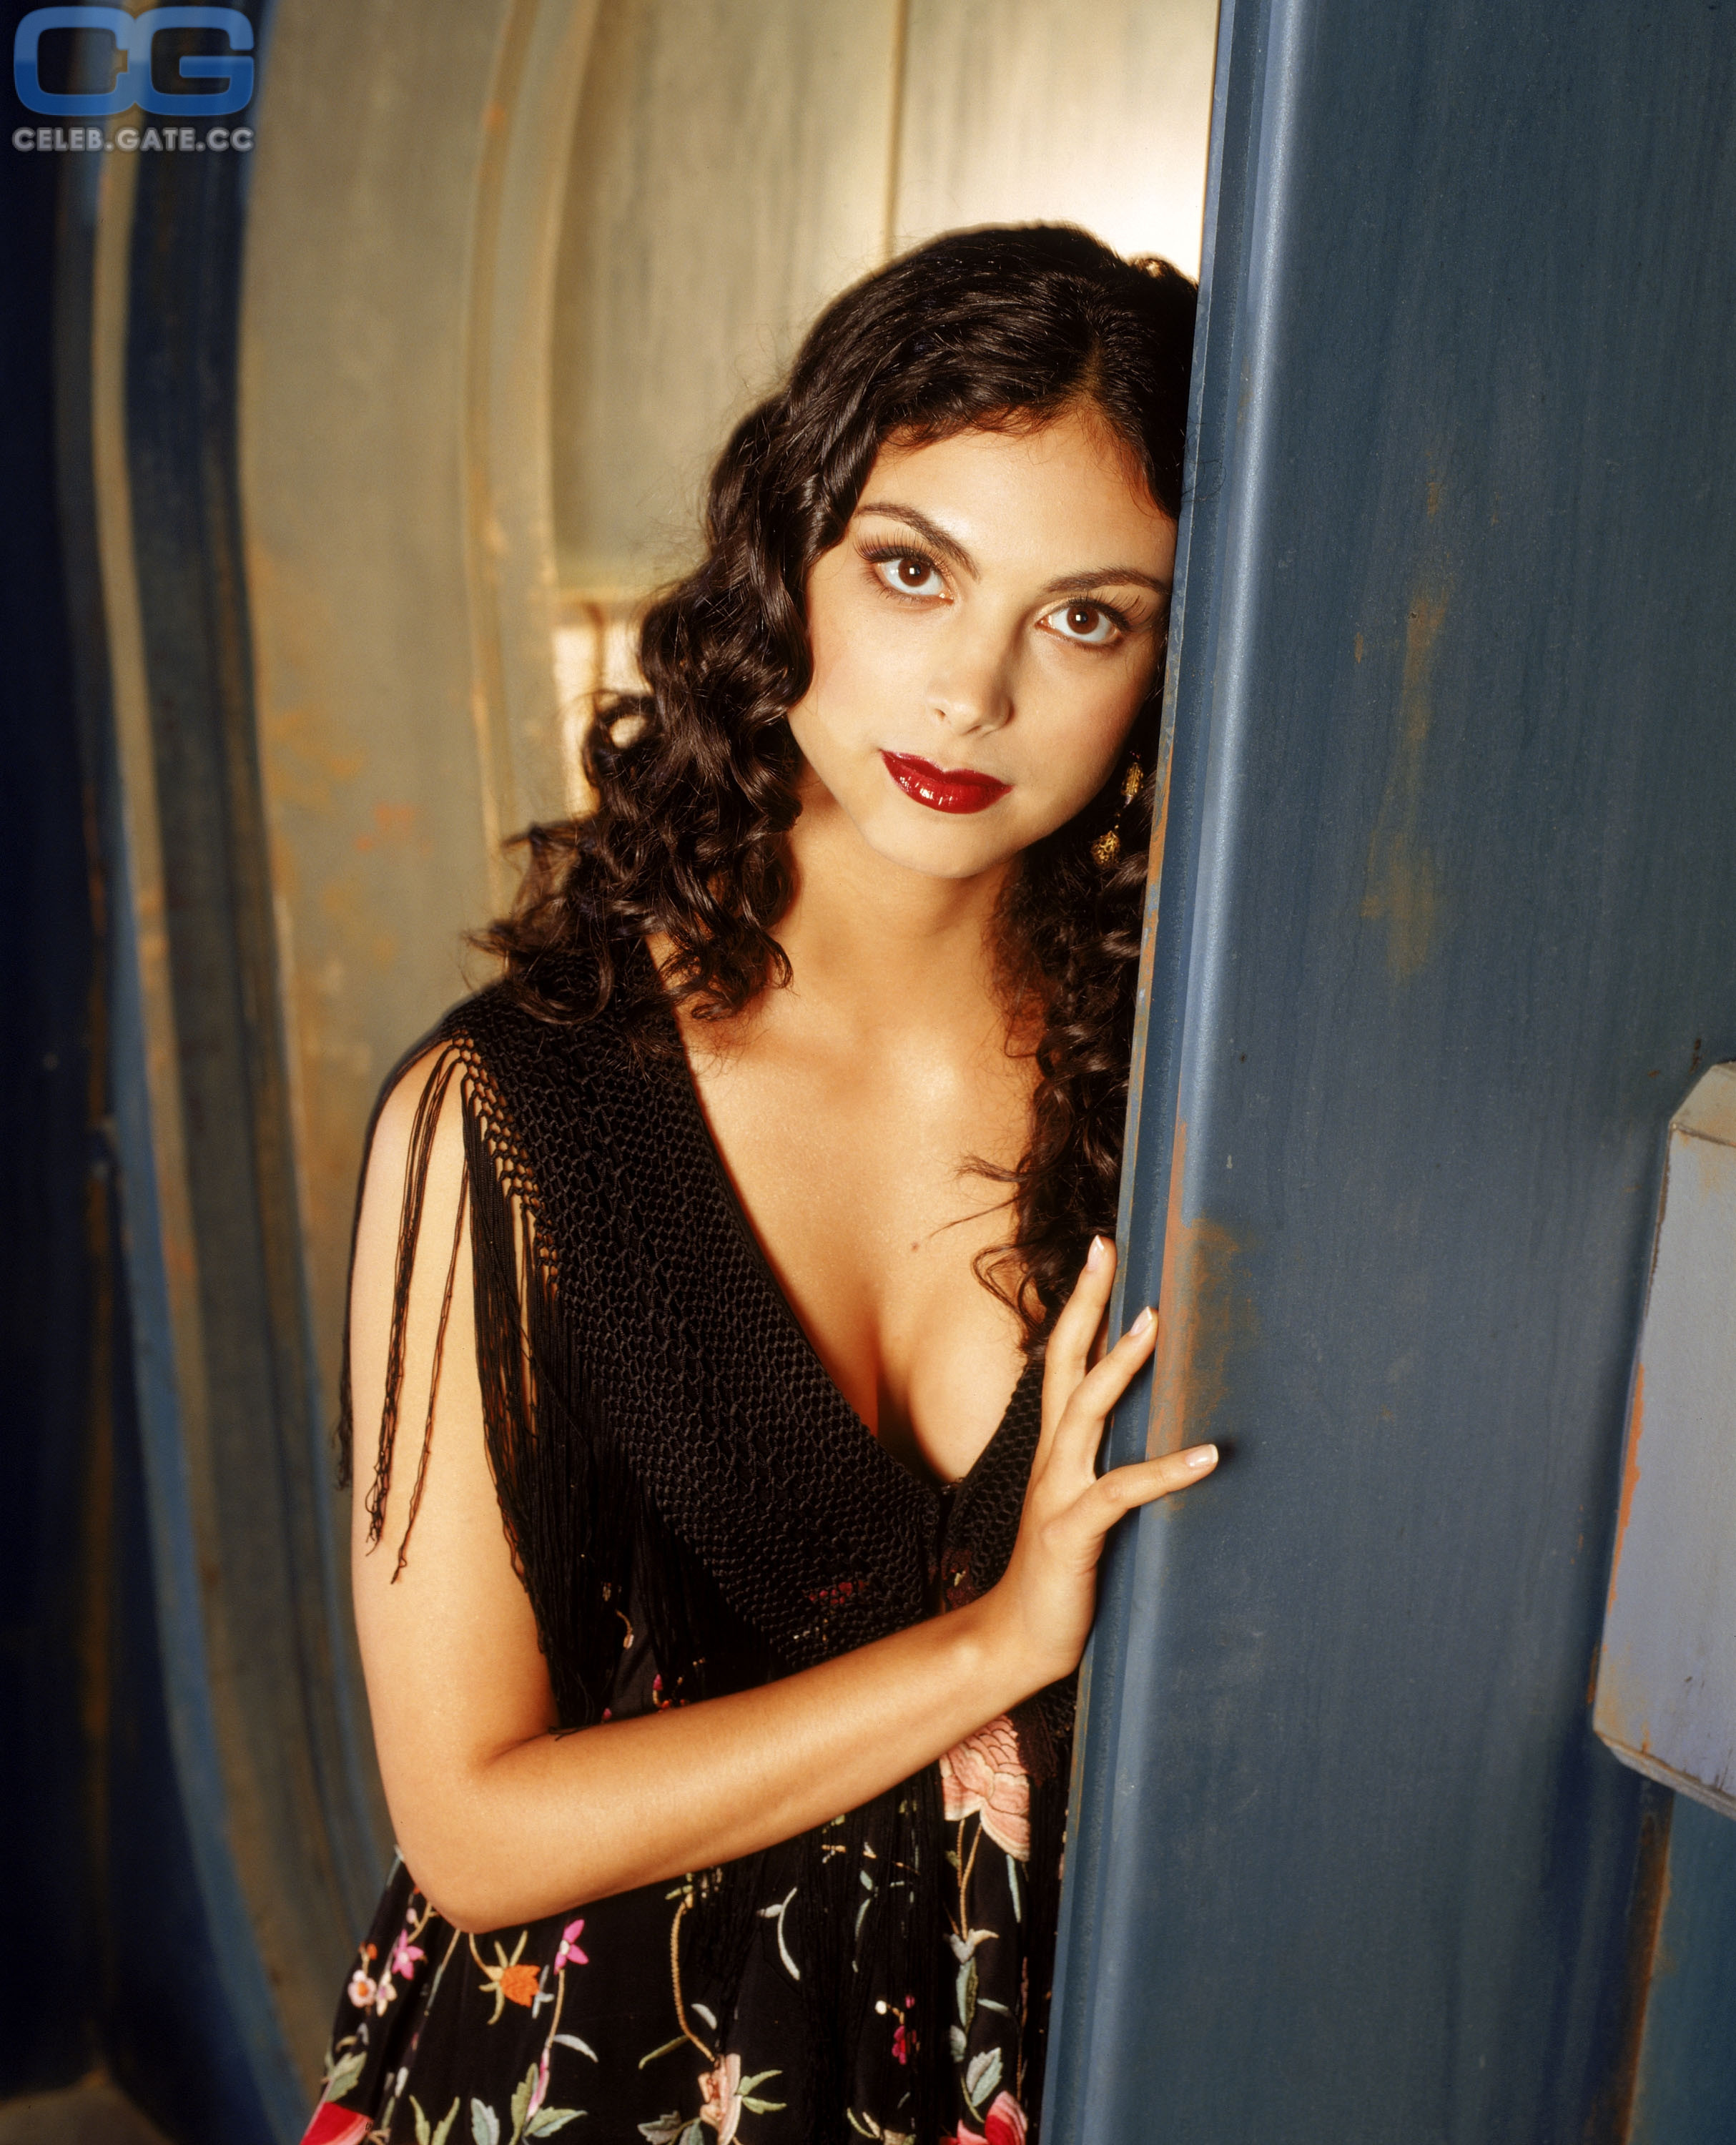 Morena baccarin fappening